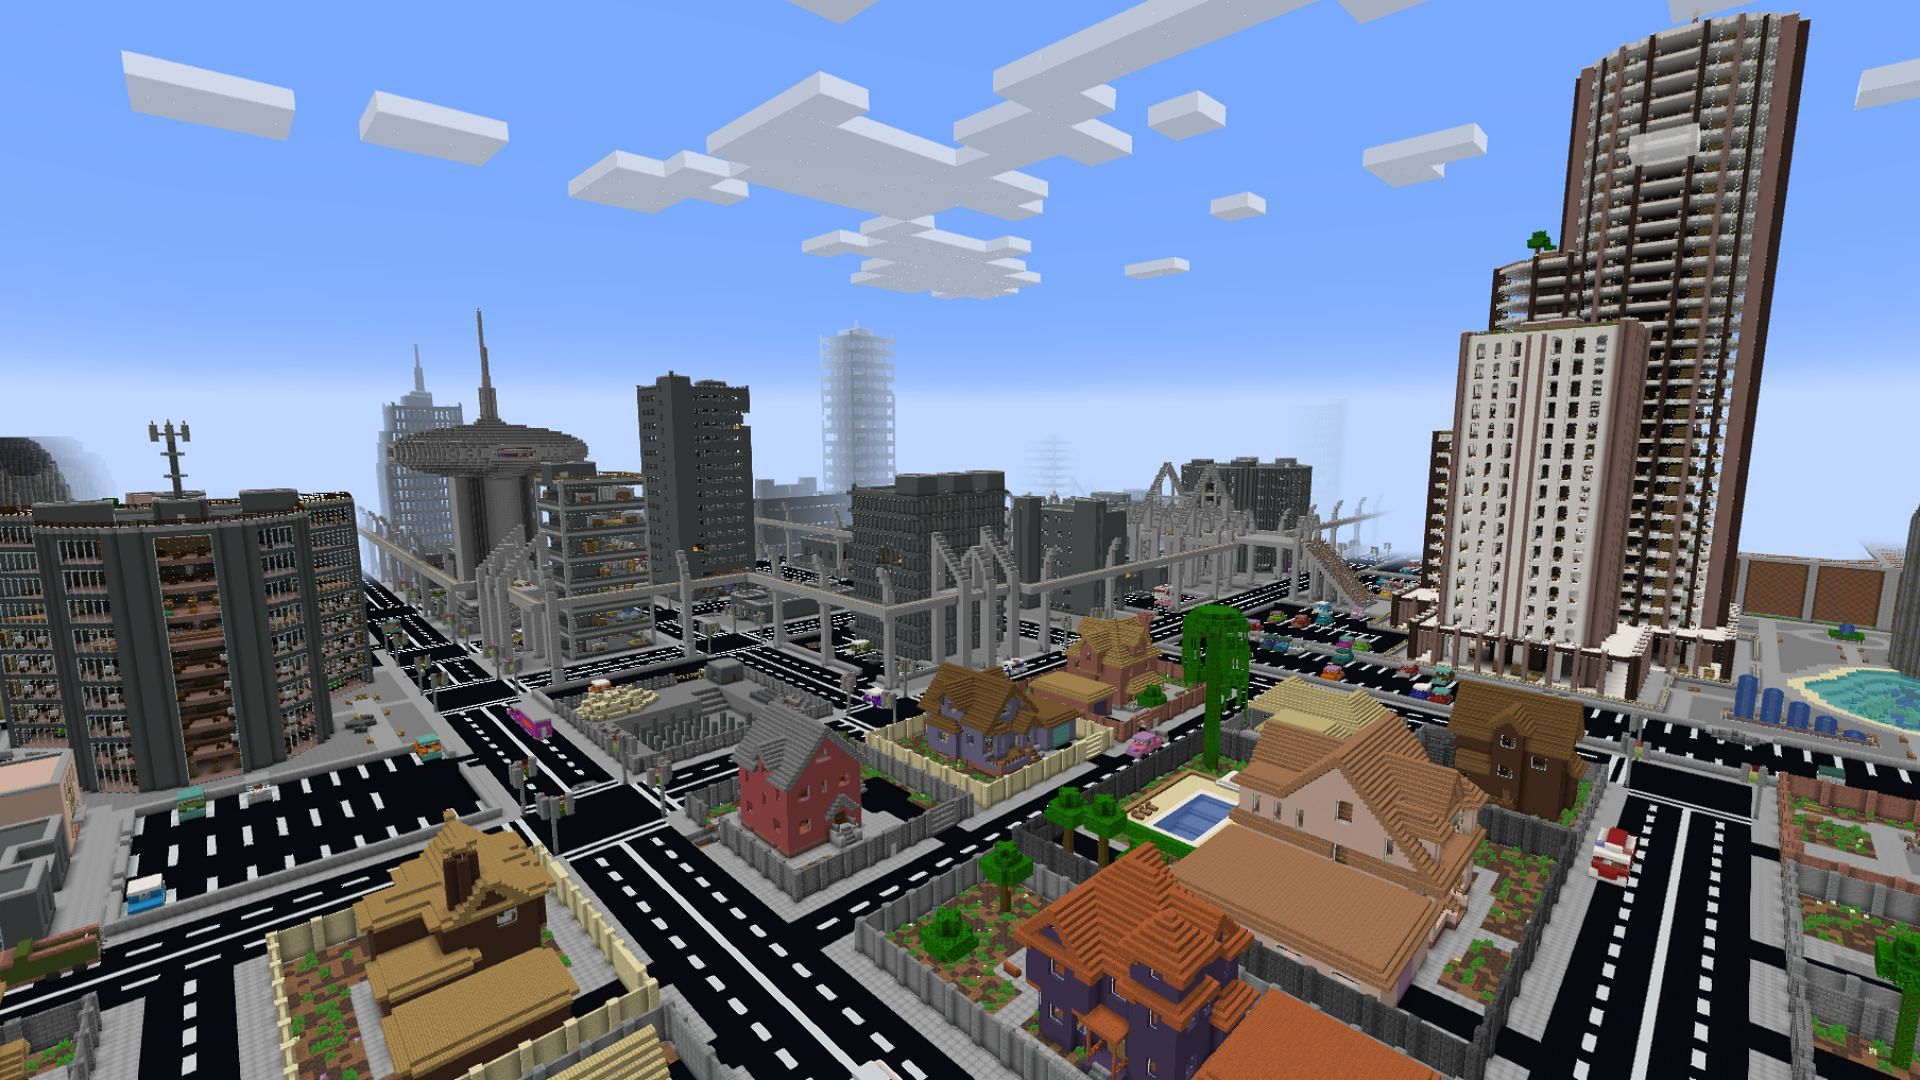 This custom world has a full fledged city for players to explore in Minecraft (Image via CurseForge)